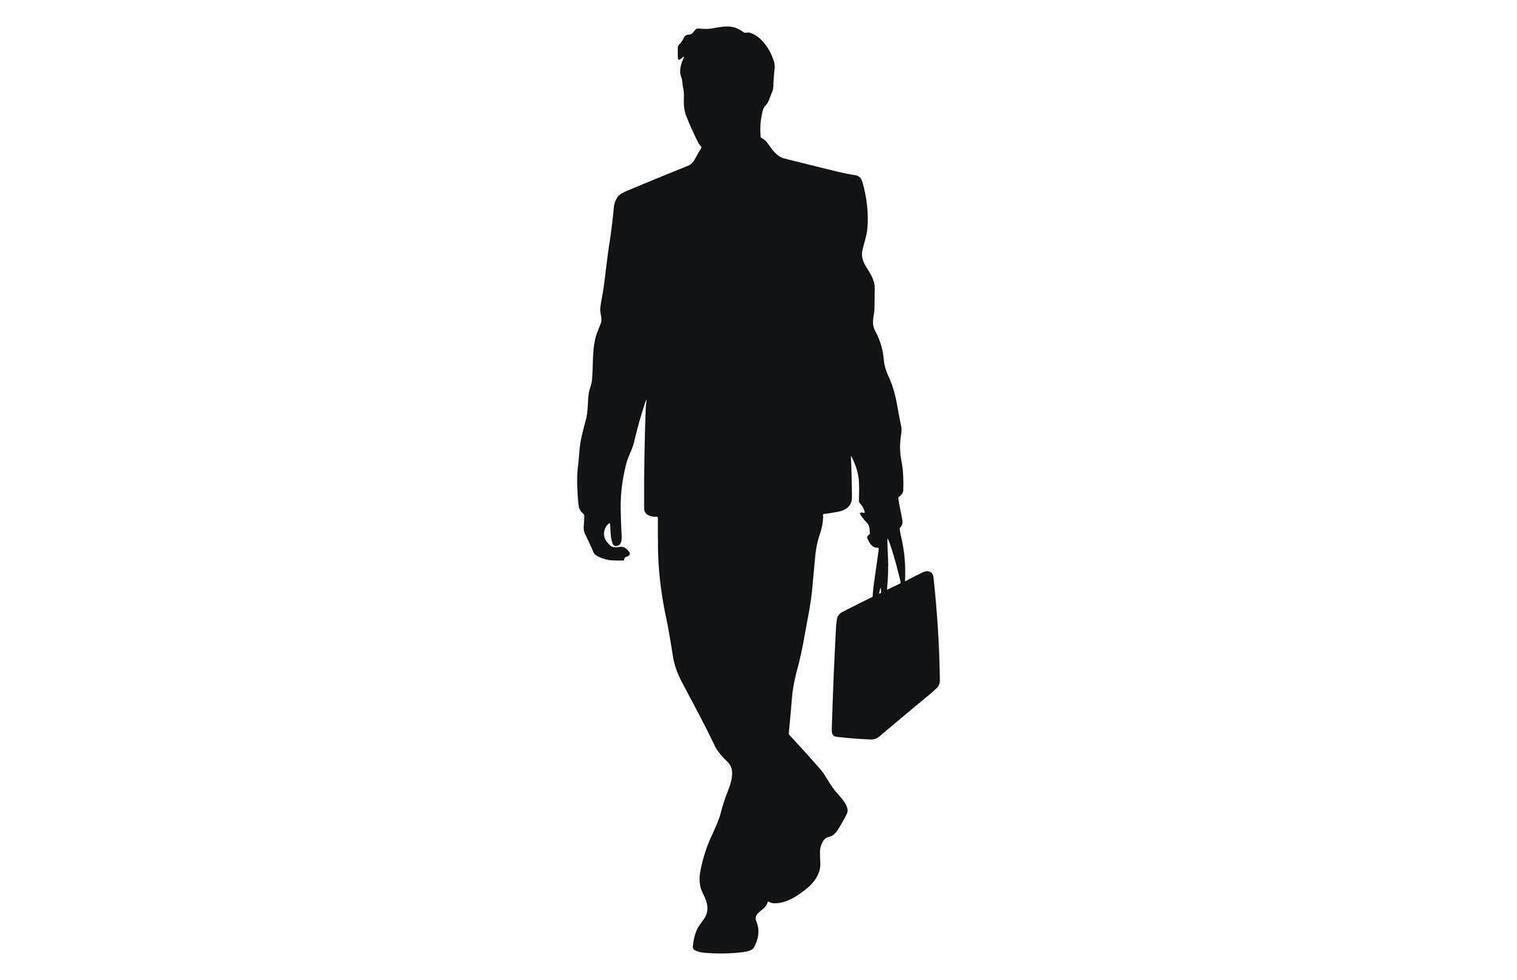 Business Man Walking, man walking with a briefcase vector